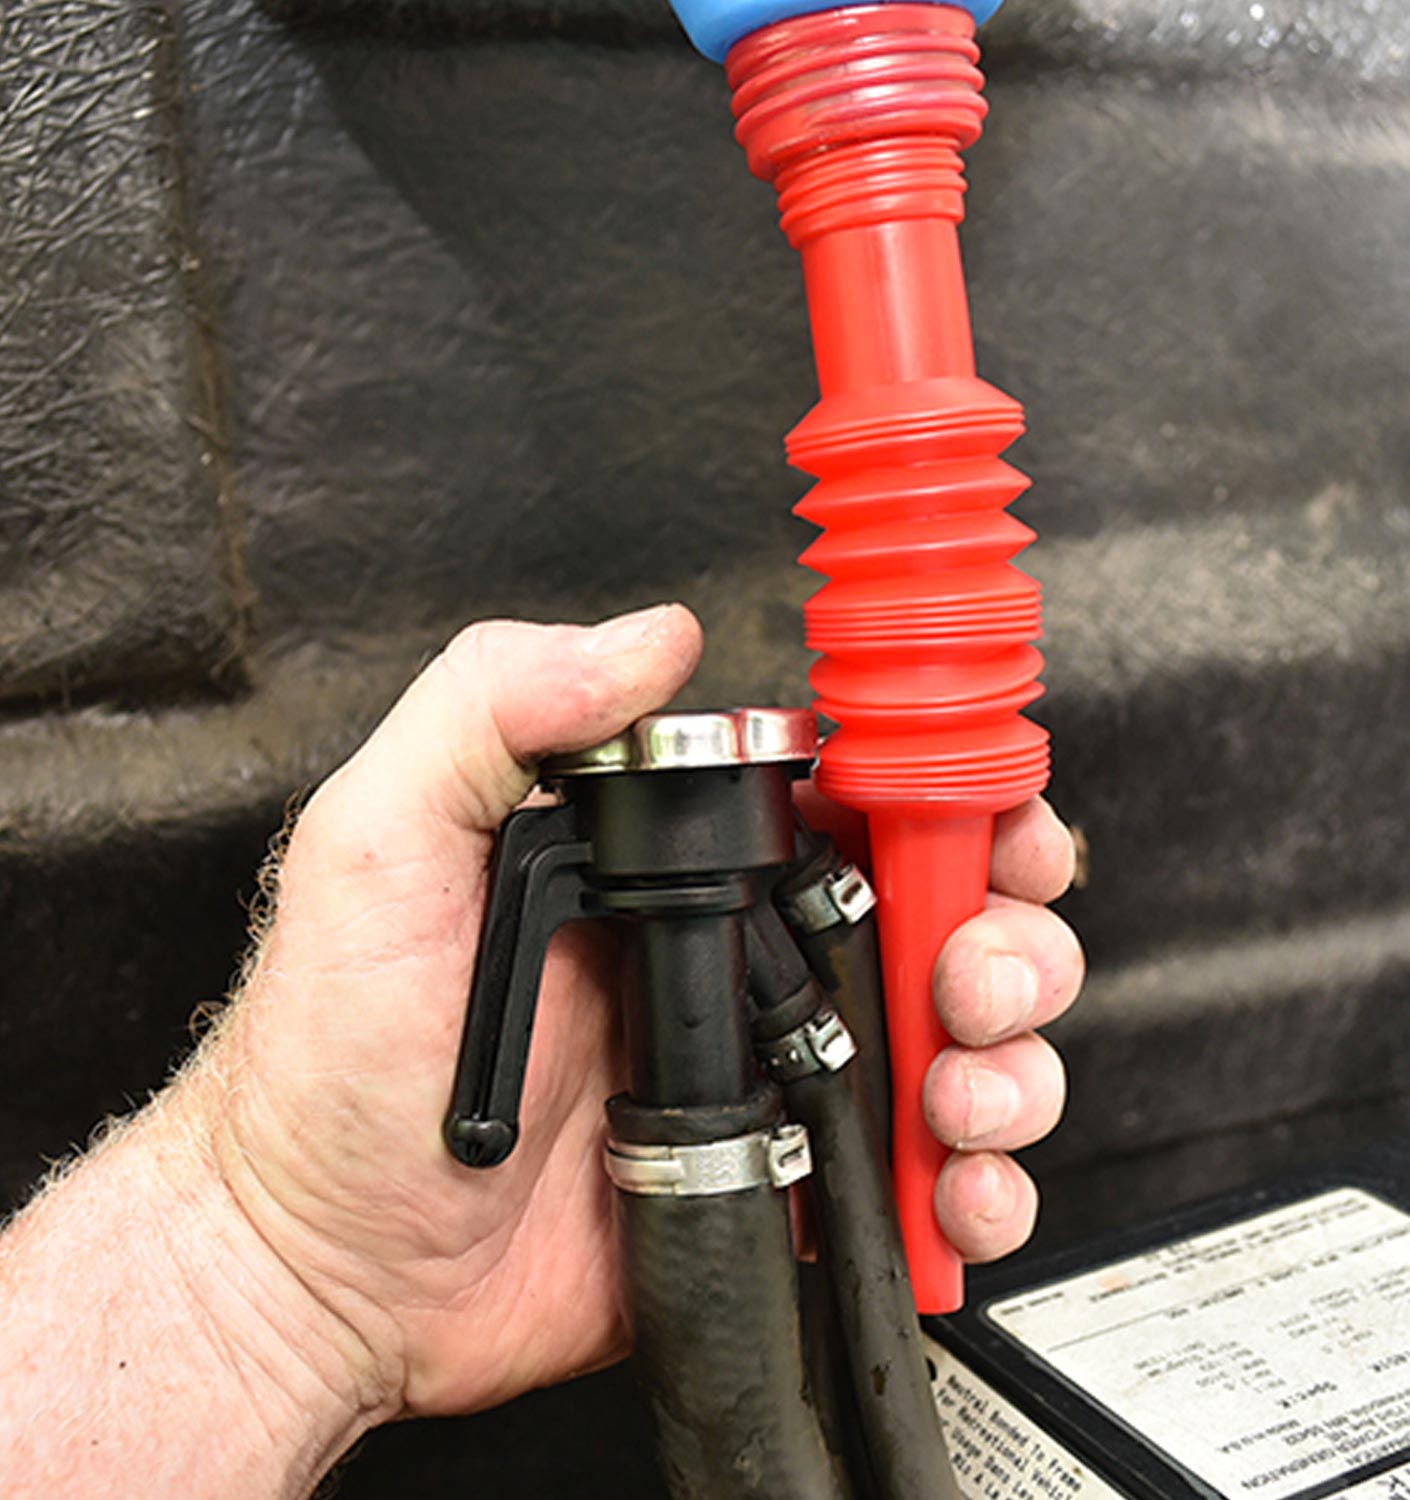 mechanic holds the radiator fill hose and funnel side by side in preparation for refilling the radiator with coolant